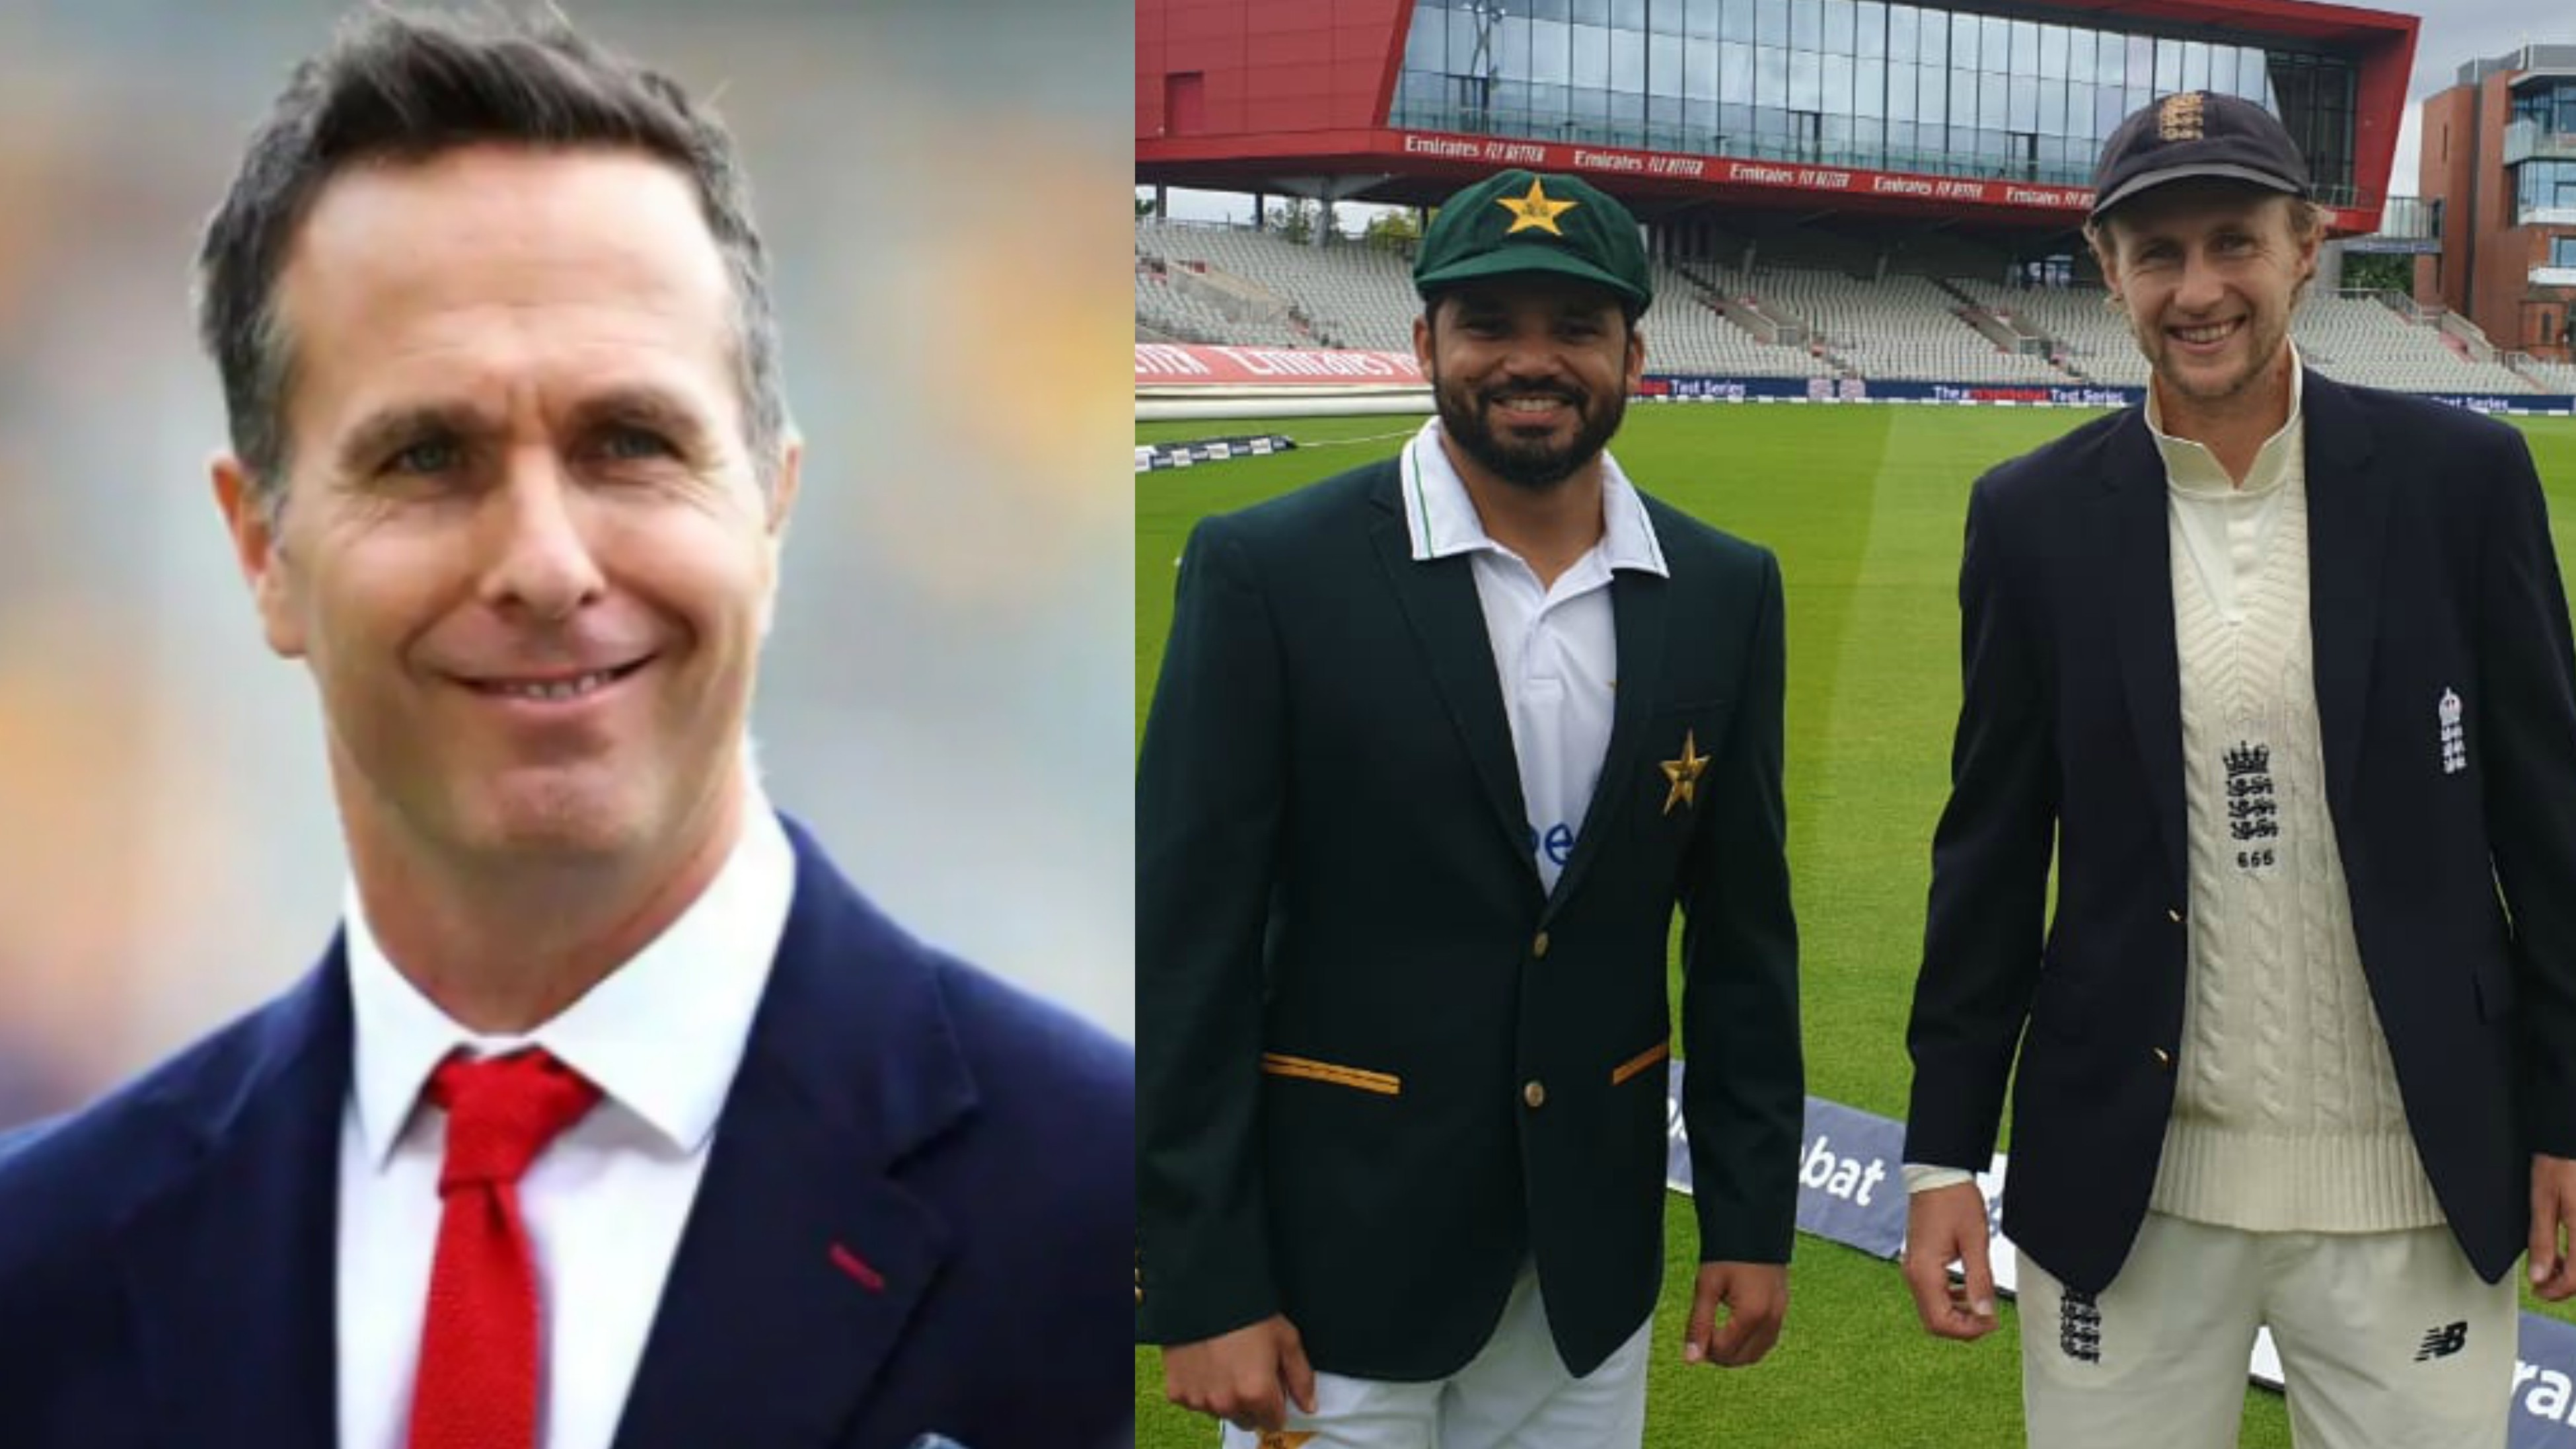 ENG v PAK 2020: England will win Test series 3-0 against Pakistan, predicts Michael Vaughan